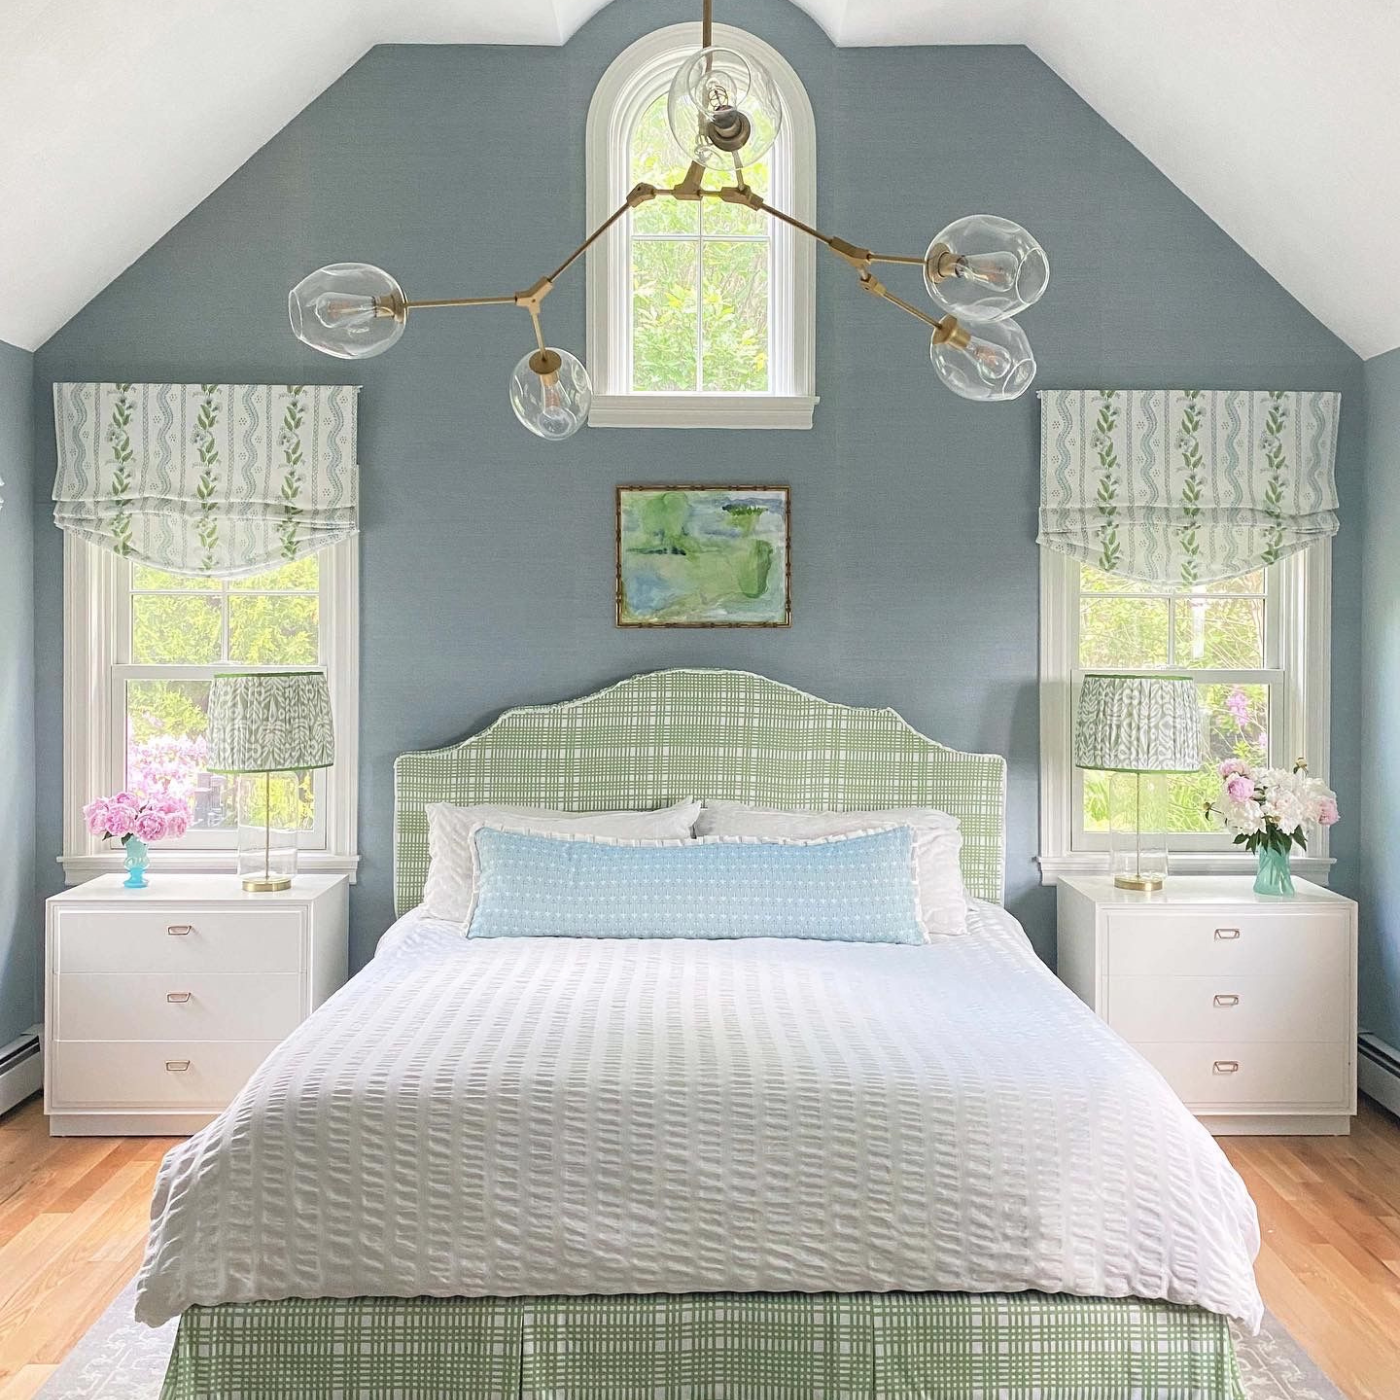 A full-sized bed is in the middle of a bedroom with rectangular windows on either side and a smaller window with a rounded top above it. The headboard and the bedskirt are both a green and white plaid. The bedspread is white and textured and two white and textured pillows are at the top of the bed behind a blue lumbar pillow with white design accents and fringe. A large bronze chandelier is above the bed with long extensions leading to globe ovals with lightbulbs. White bedside tables with three drawers are on either side of the bed. They both have vases with flowers in them (on the left a blue vase and pink flowers, on the right a green vase with pink and white flowers) and a gray-and-white lamp. White valances with alternating rows of blue wavy lines and sprigs of green leaves are on each of the rectangular windows.